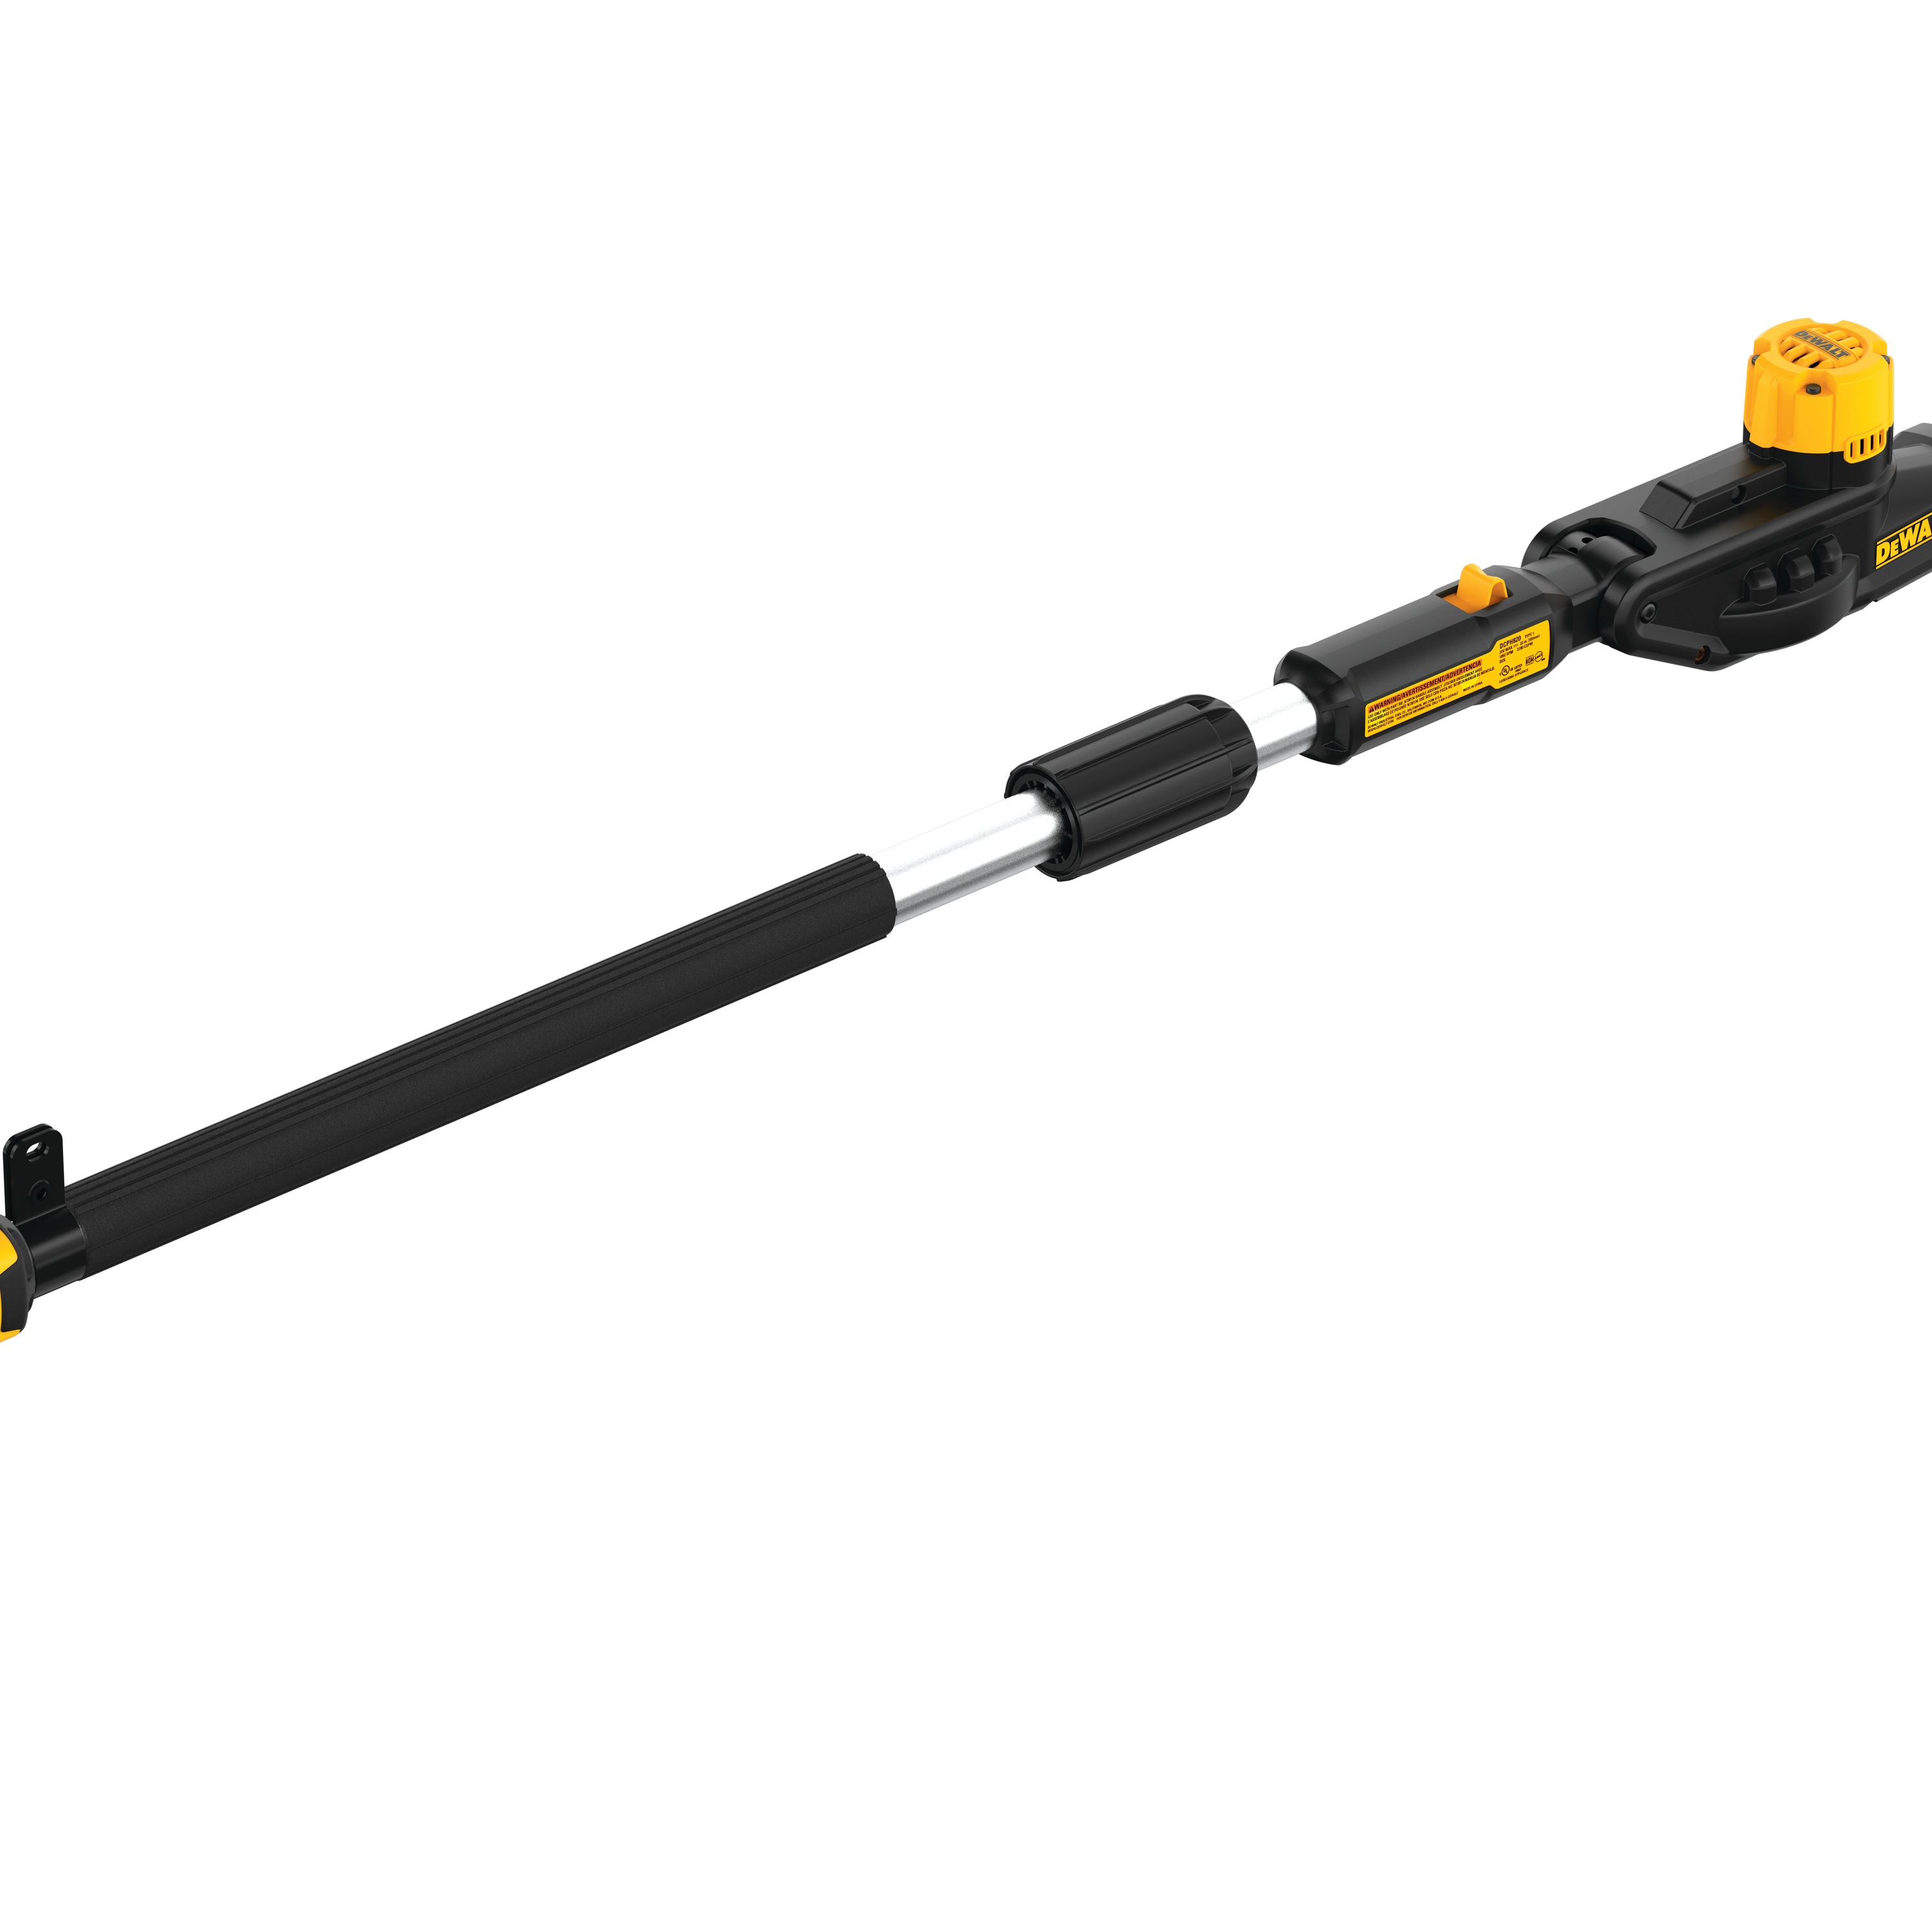 Profile of Pole Hedge Trimmer with battery.